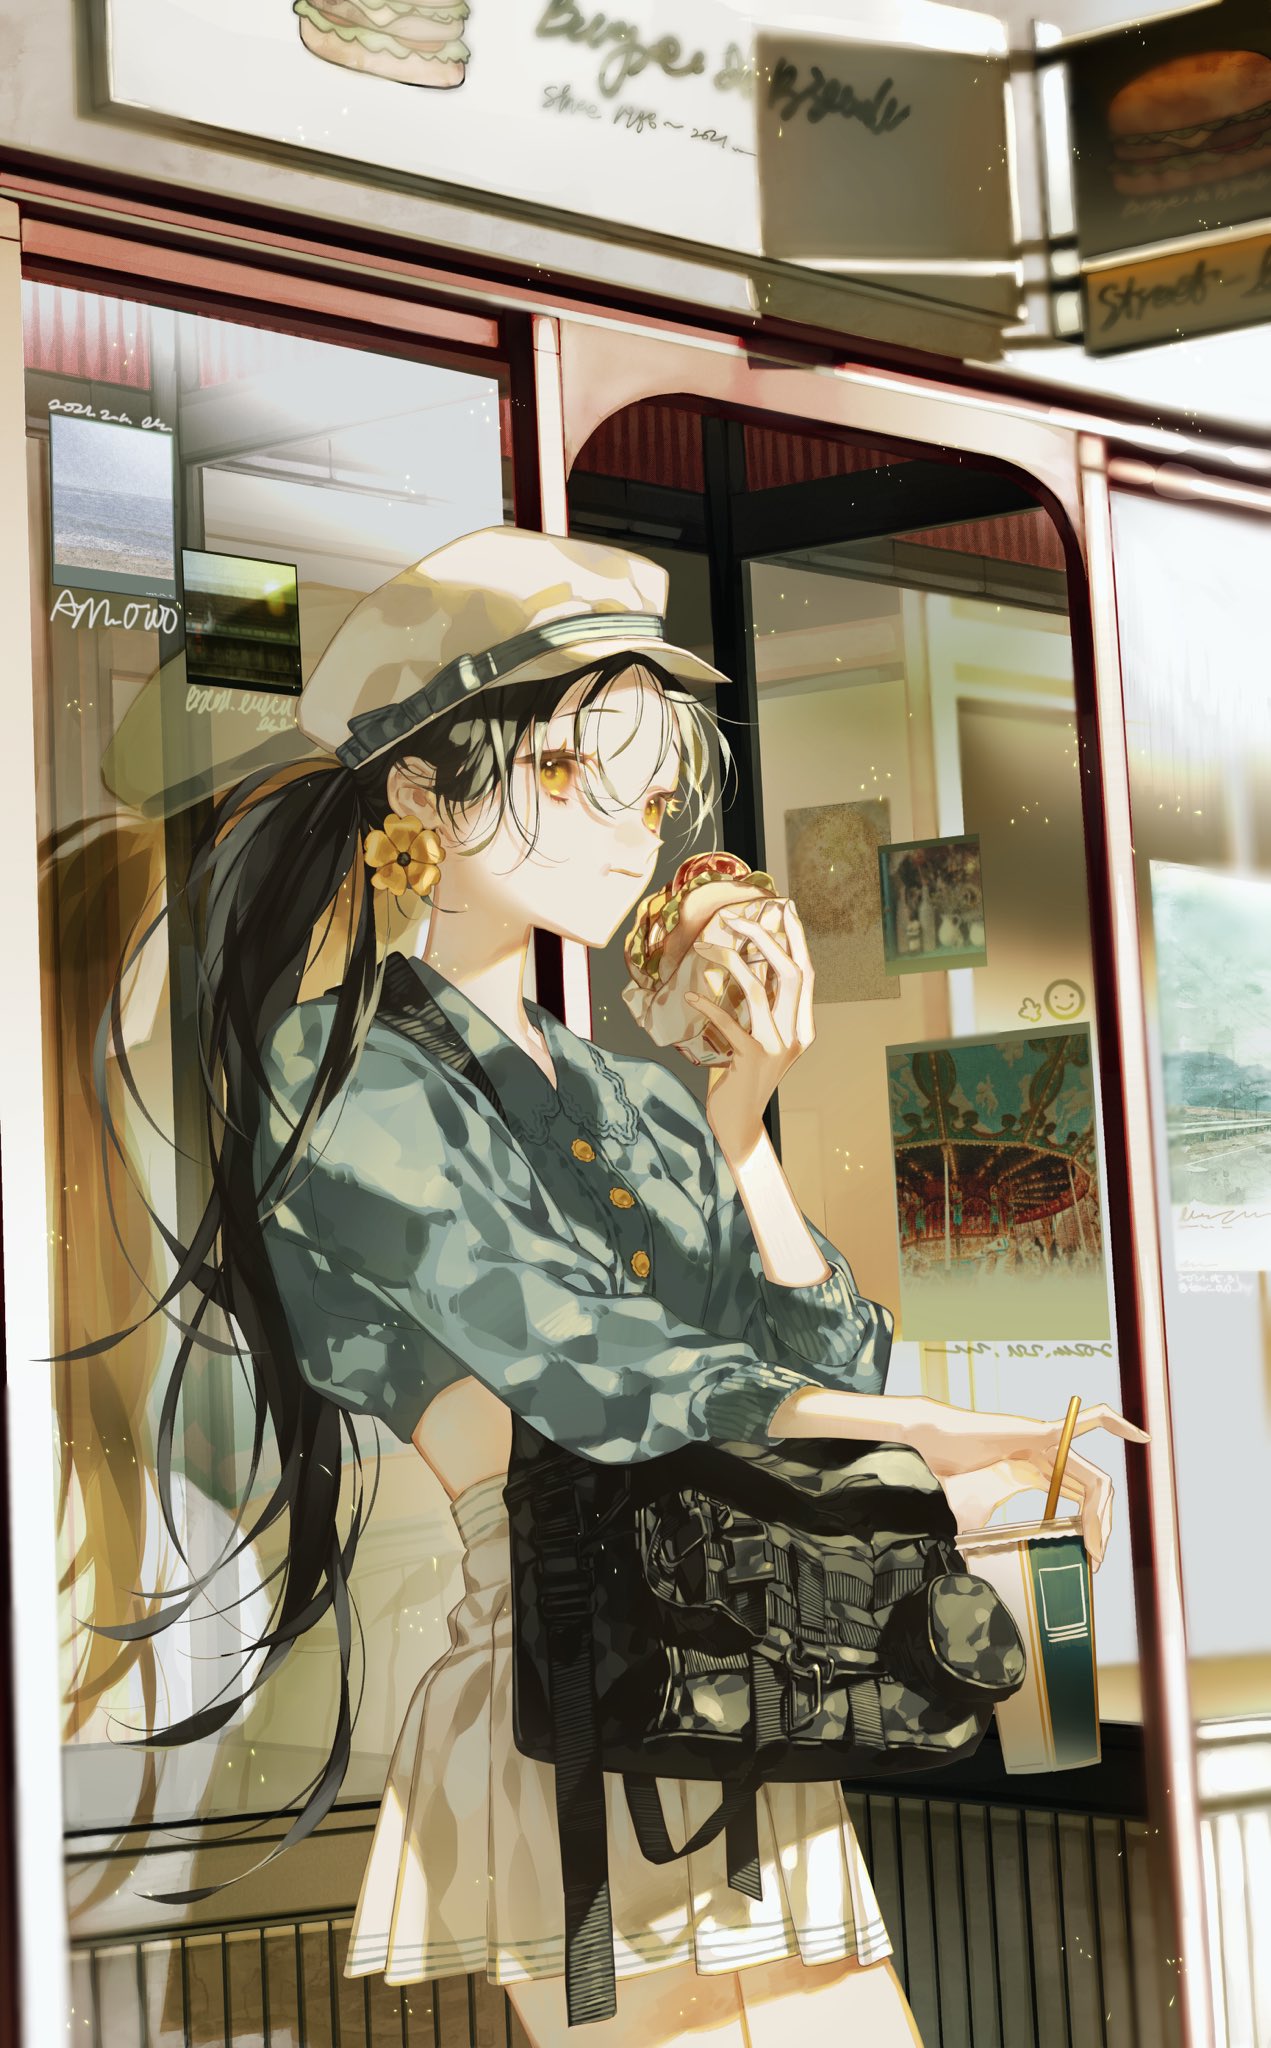 1girl bag black_hair blouse blue_blouse burger cowboy_shot crop_top cup disposable_cup earrings eating fast_food flower_earrings food hat highres holding holding_cup holding_food jewelry light_particles long_hair long_sleeves original outdoors pleated_skirt ponytail poster_(object) restaurant shoulder_bag skirt solo standing storefront tears_namida white_headwear white_skirt yellow_eyes